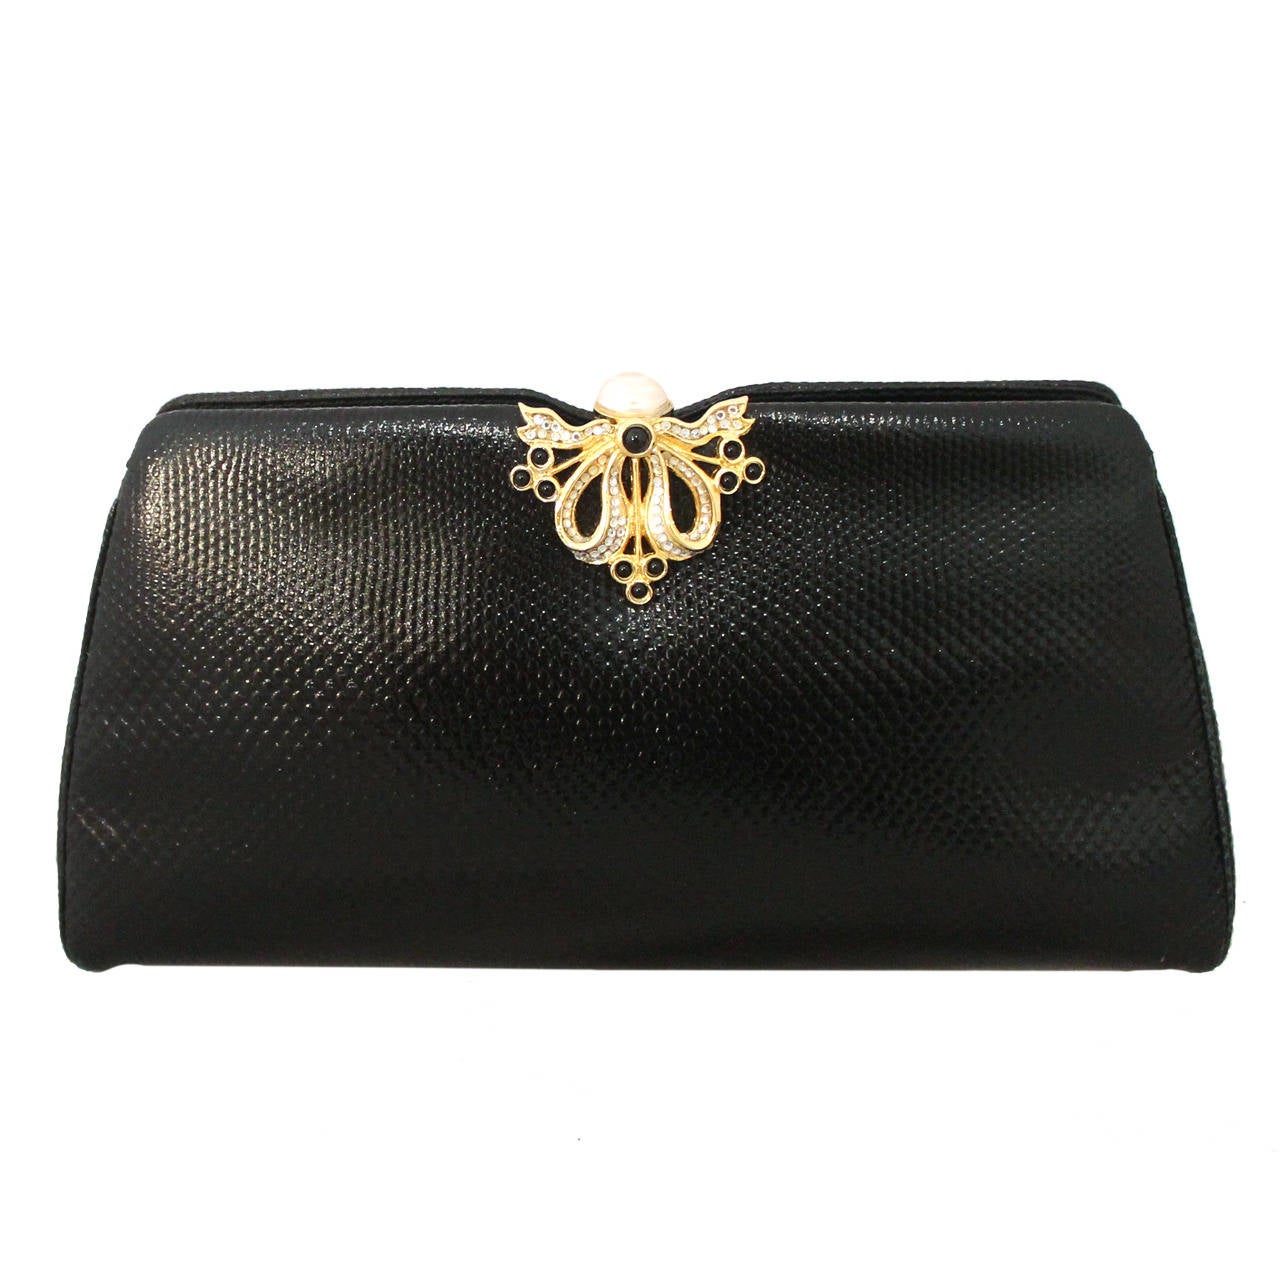 Judith Leiber 1980's Vintage Black Lizard Evening Bag with Pearl Clasp